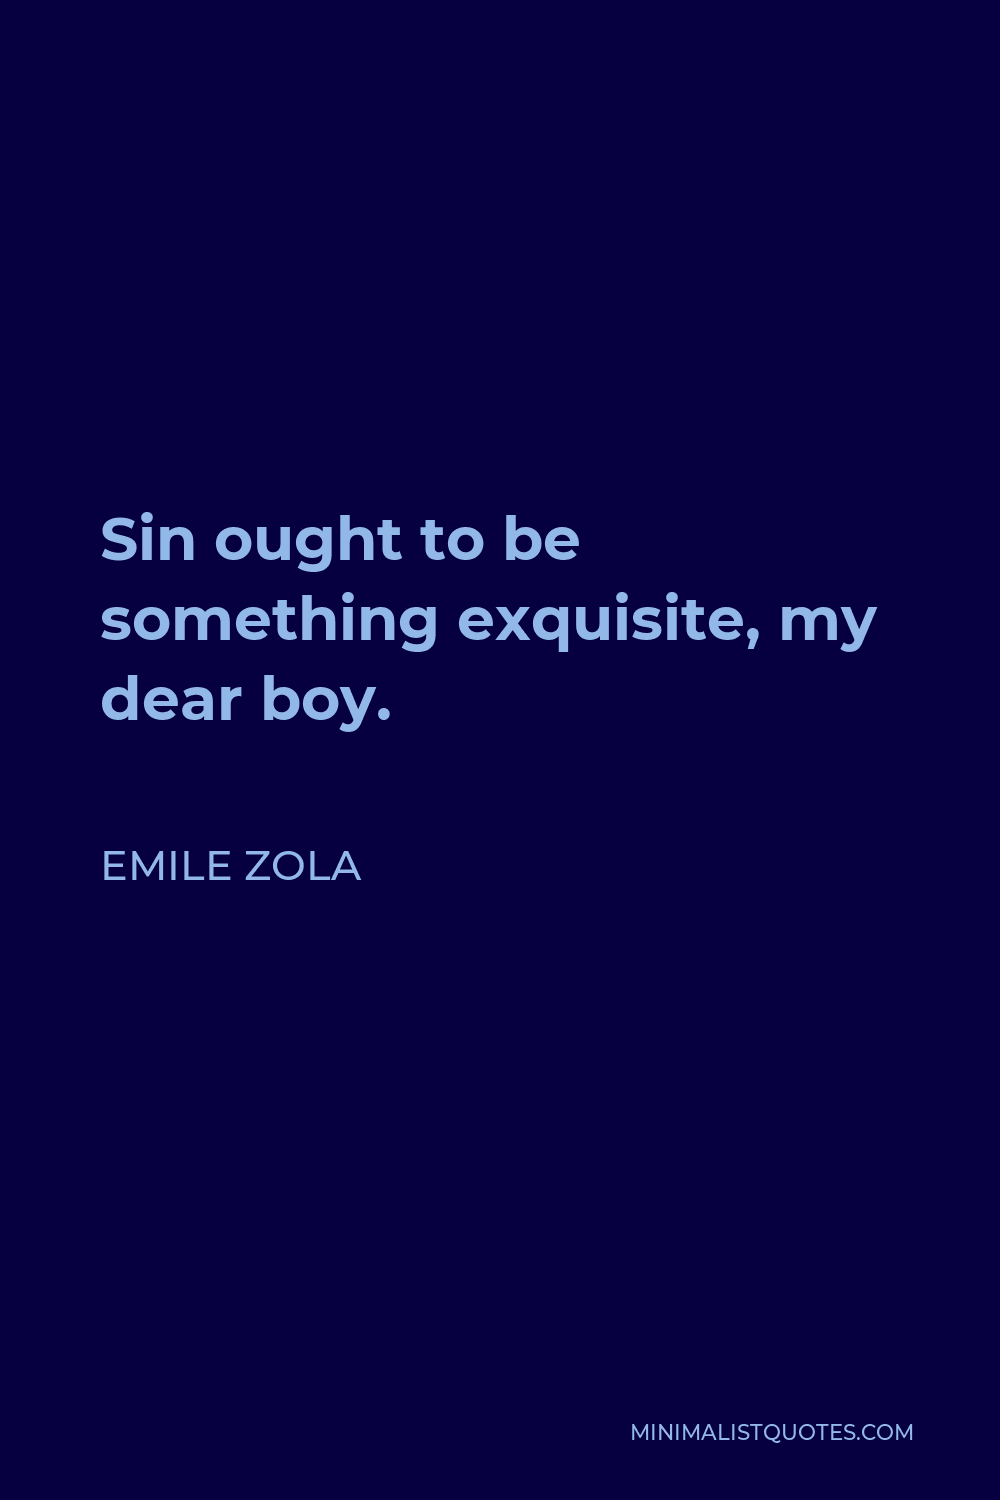 Emile Zola Quote - Sin ought to be something exquisite, my dear boy.